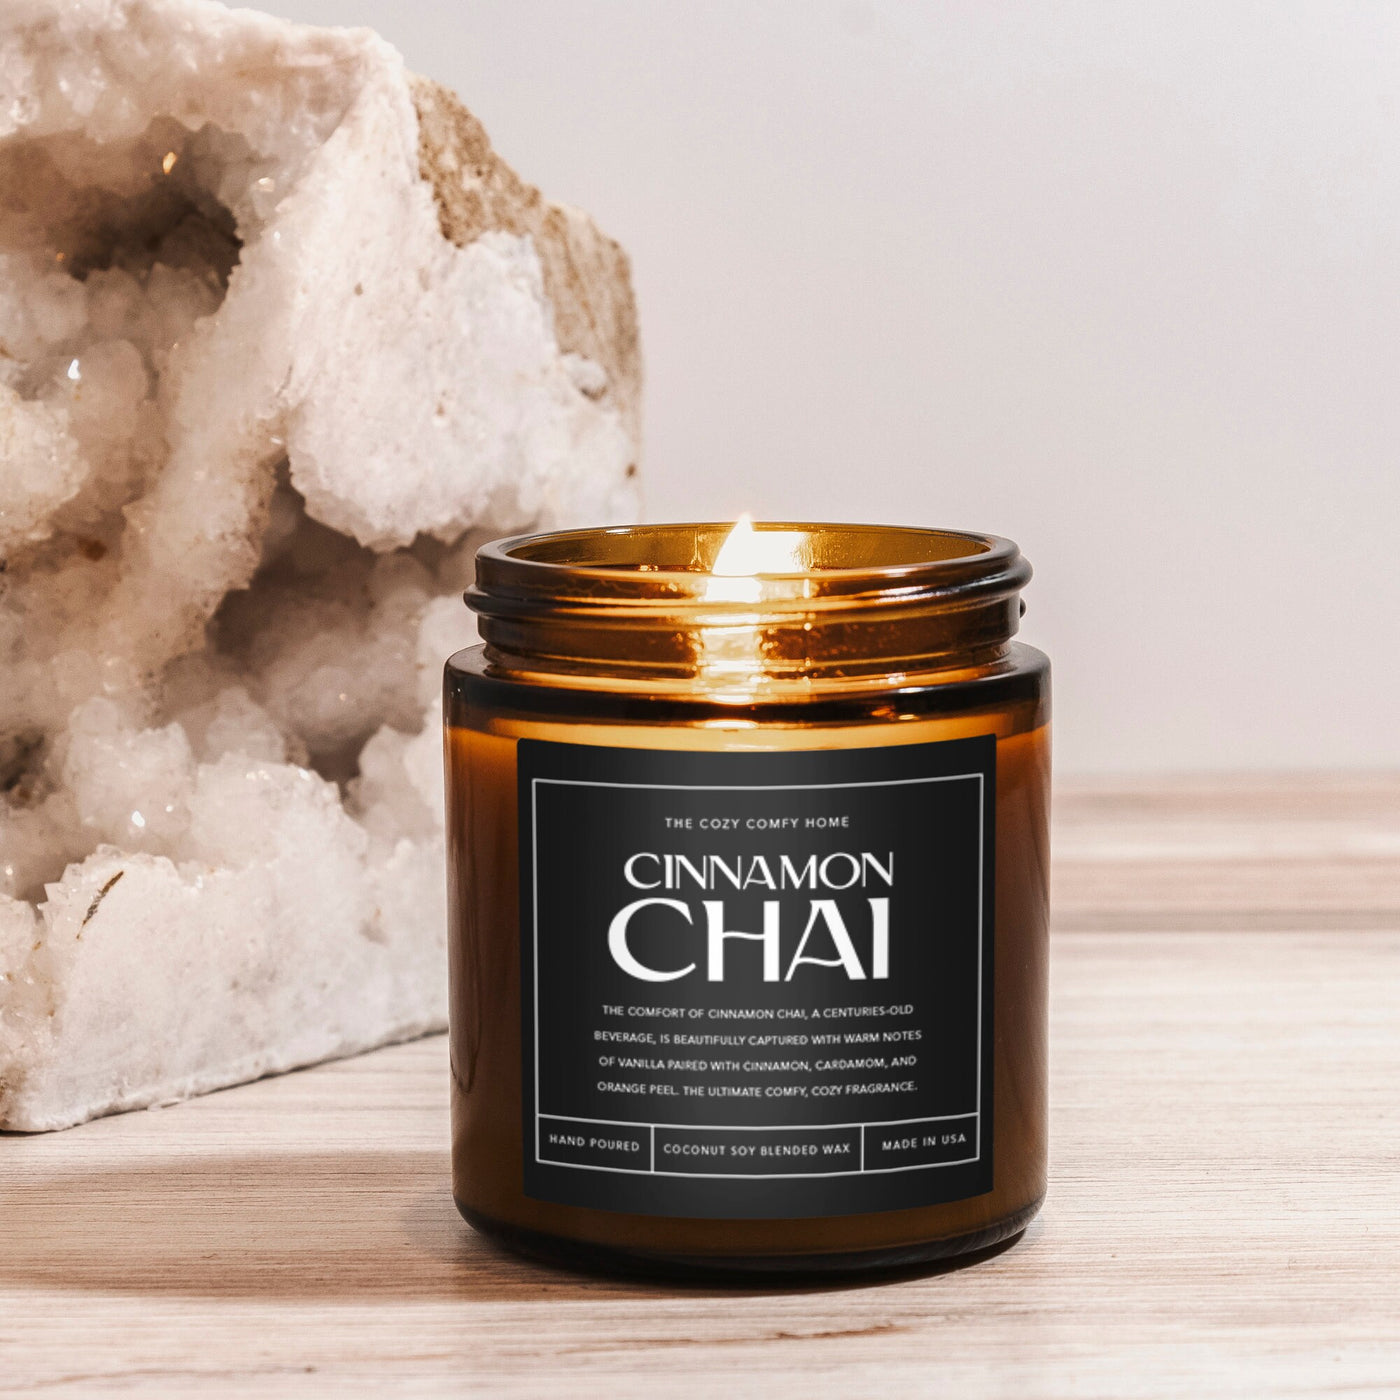 Cinnamon chai hand poured candle, Scented Candle, Coconut soy wax candle, Vegan candle, Gift for her, Gift For mom, Gift for Sister